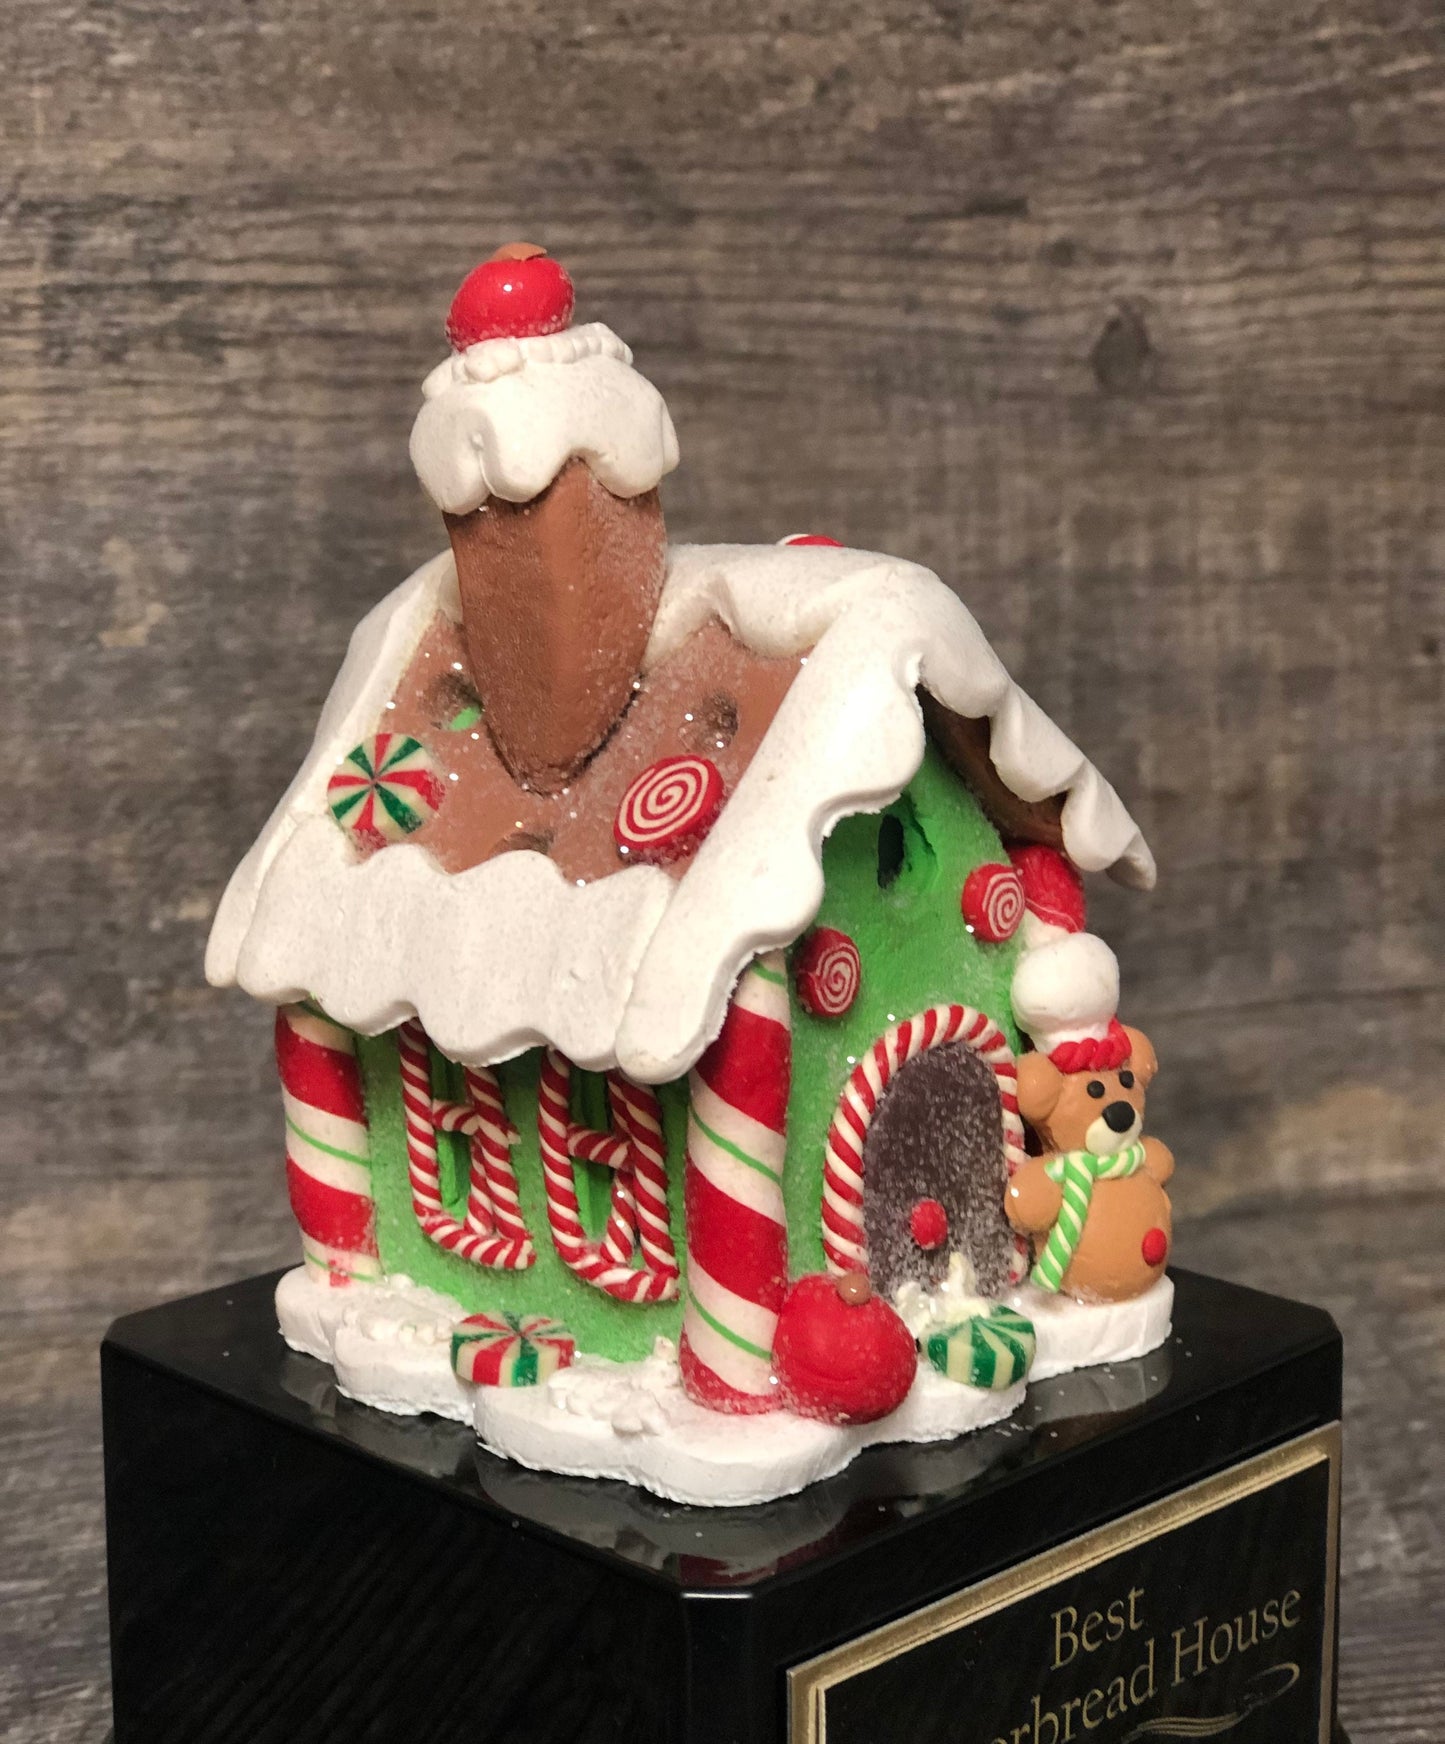 Gingerbread House Cookie Bake Off Trophy Ugly Sweater Trophy Contest Award Winner Christmas Cookie Decorating Holiday Party Teddy Bear